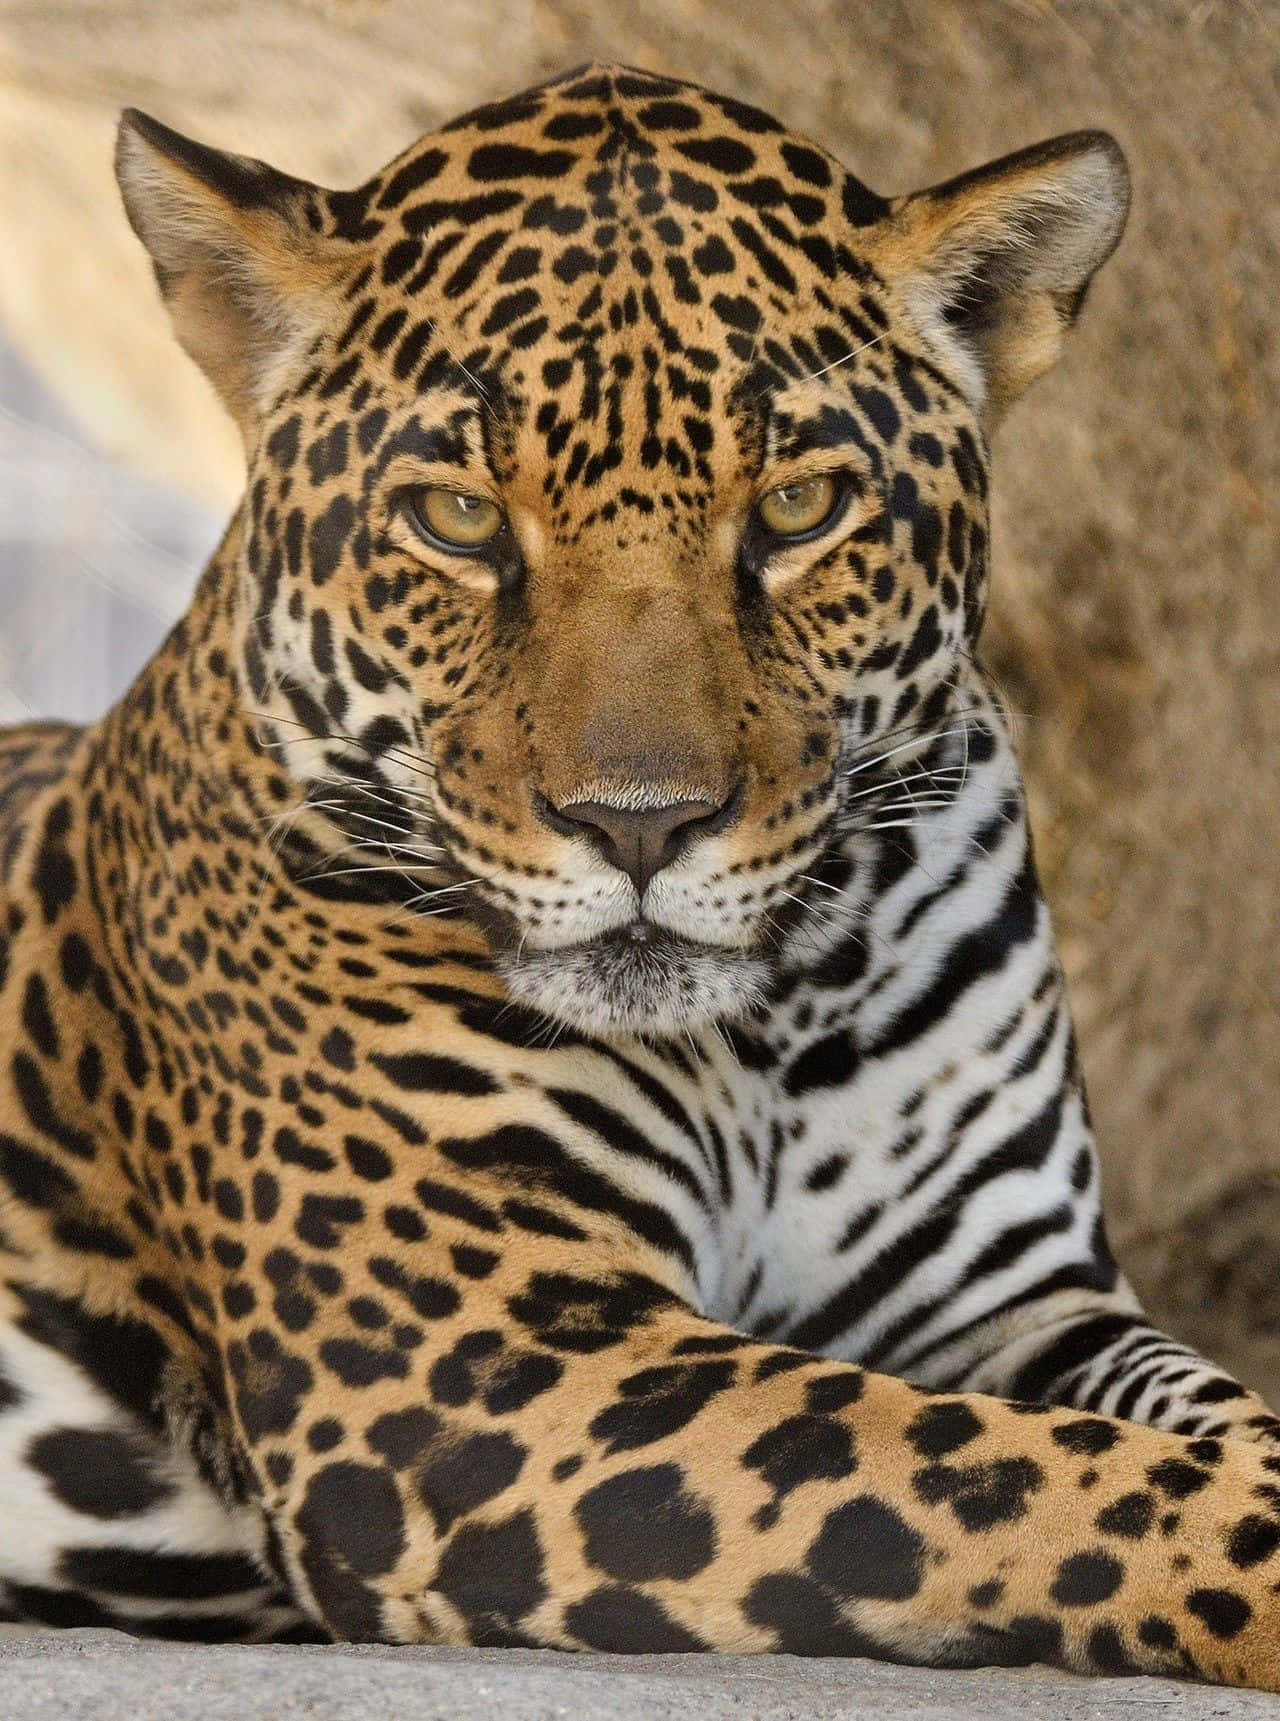 A Jaguar Laying Down In A Cave